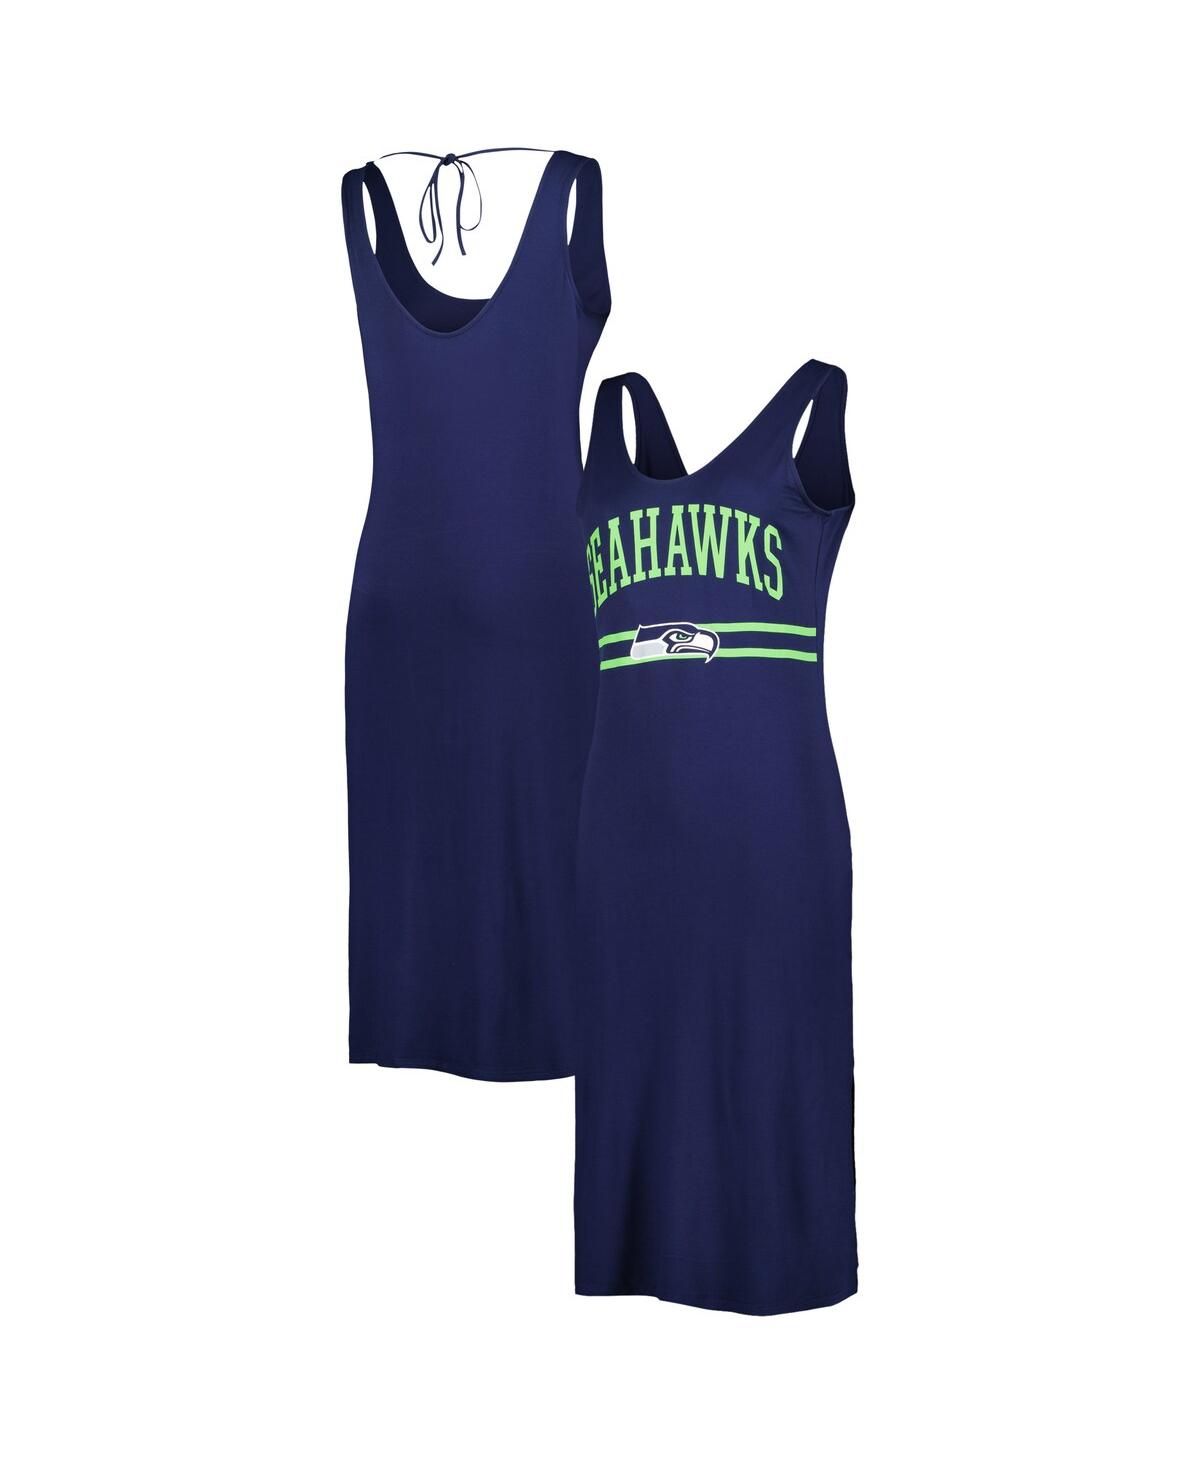 G-III 4HER BY CARL BANKS WOMEN'S G-III 4HER BY CARL BANKS COLLEGE NAVY SEATTLE SEAHAWKS TRAINING V-NECK MAXI DRESS